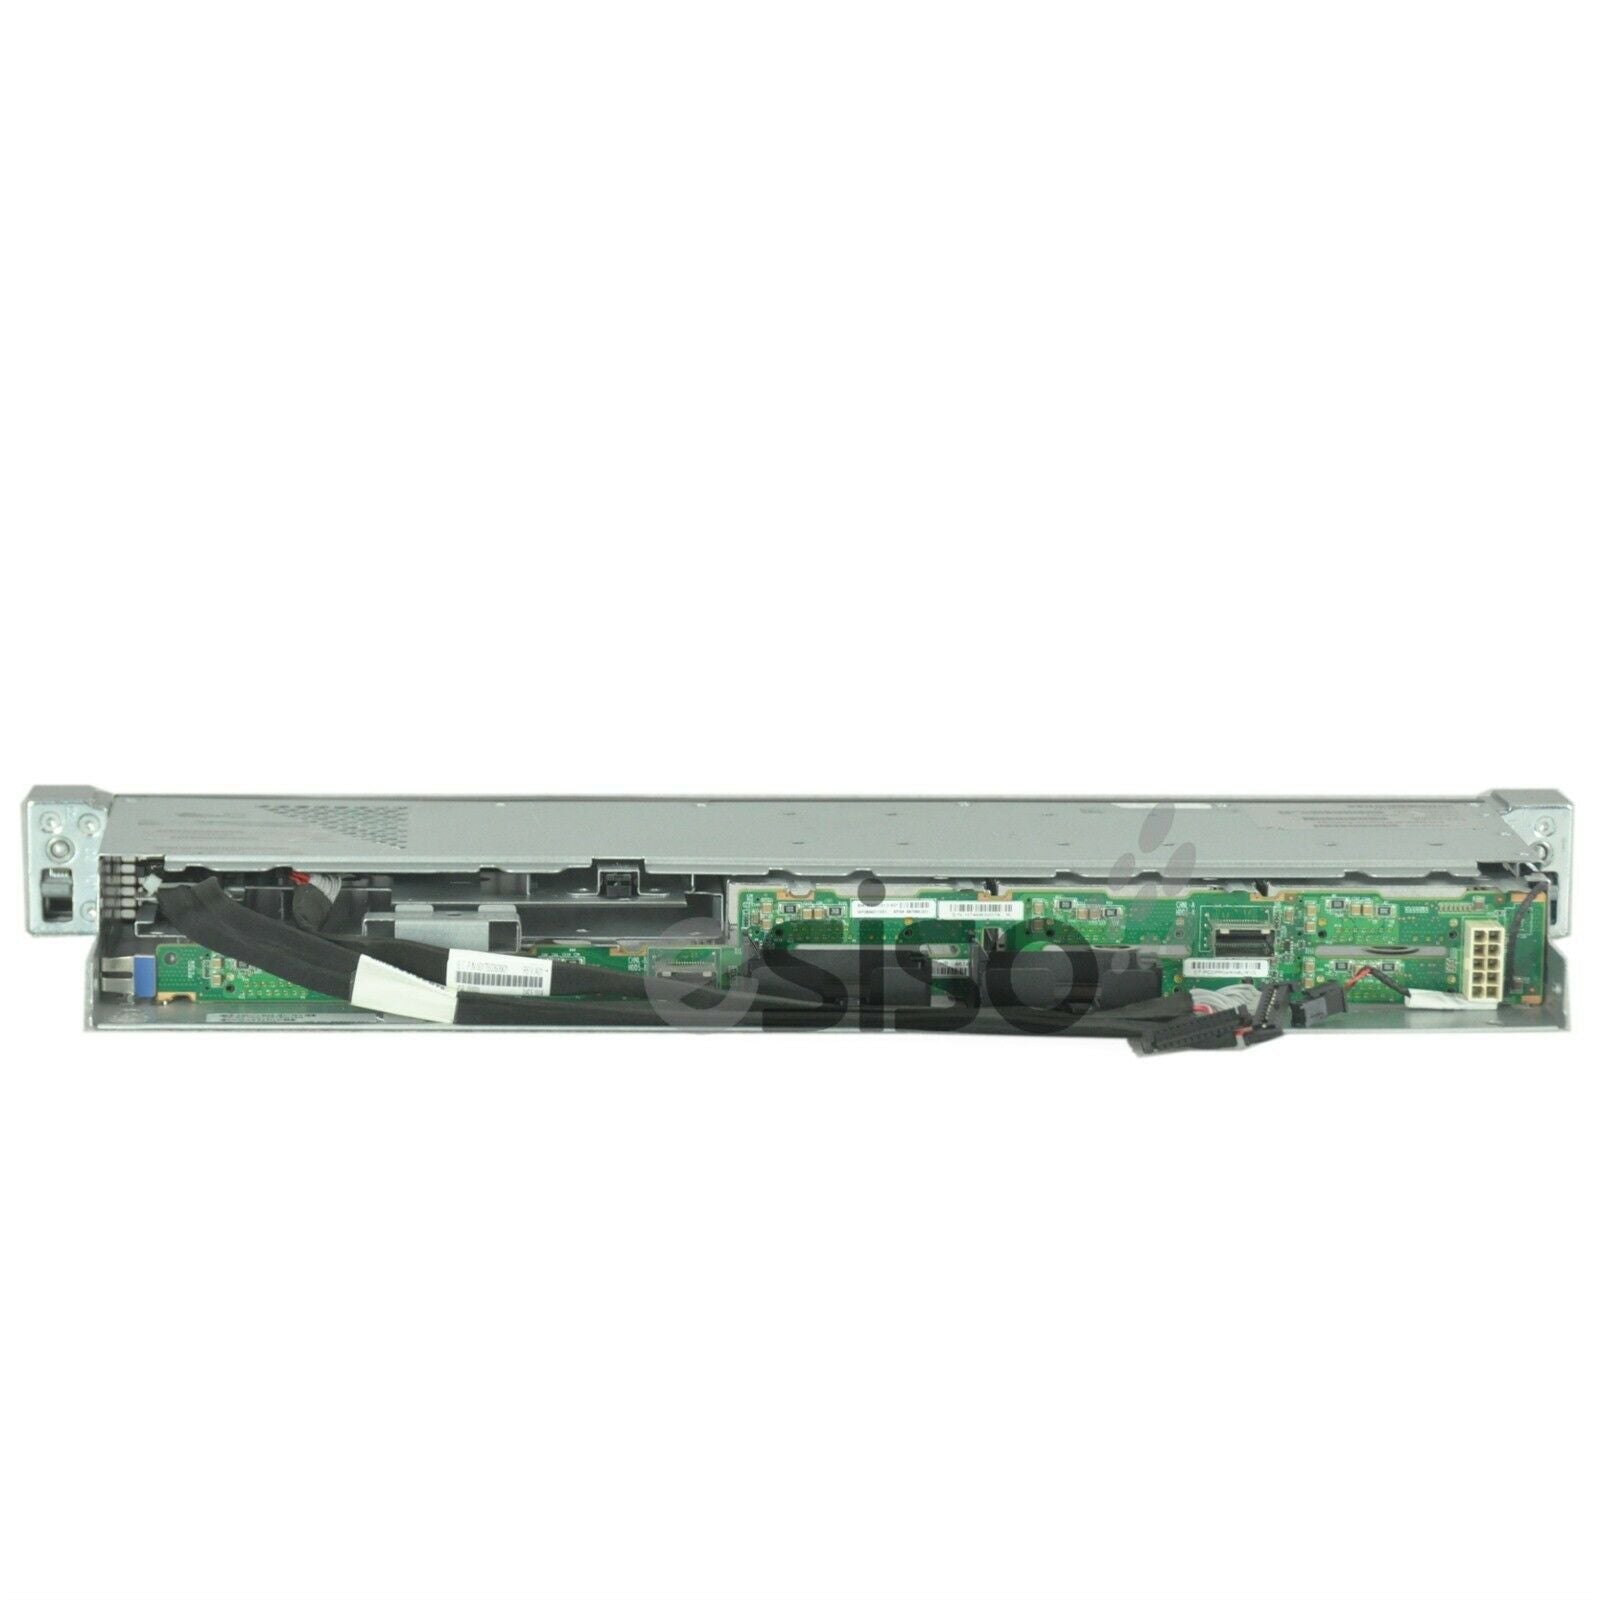 668240-001 HP 8 SFF FRONT DRIVE CAGE WITH BACKPLANE FOR PROLIANT DL360e G8 GEN8